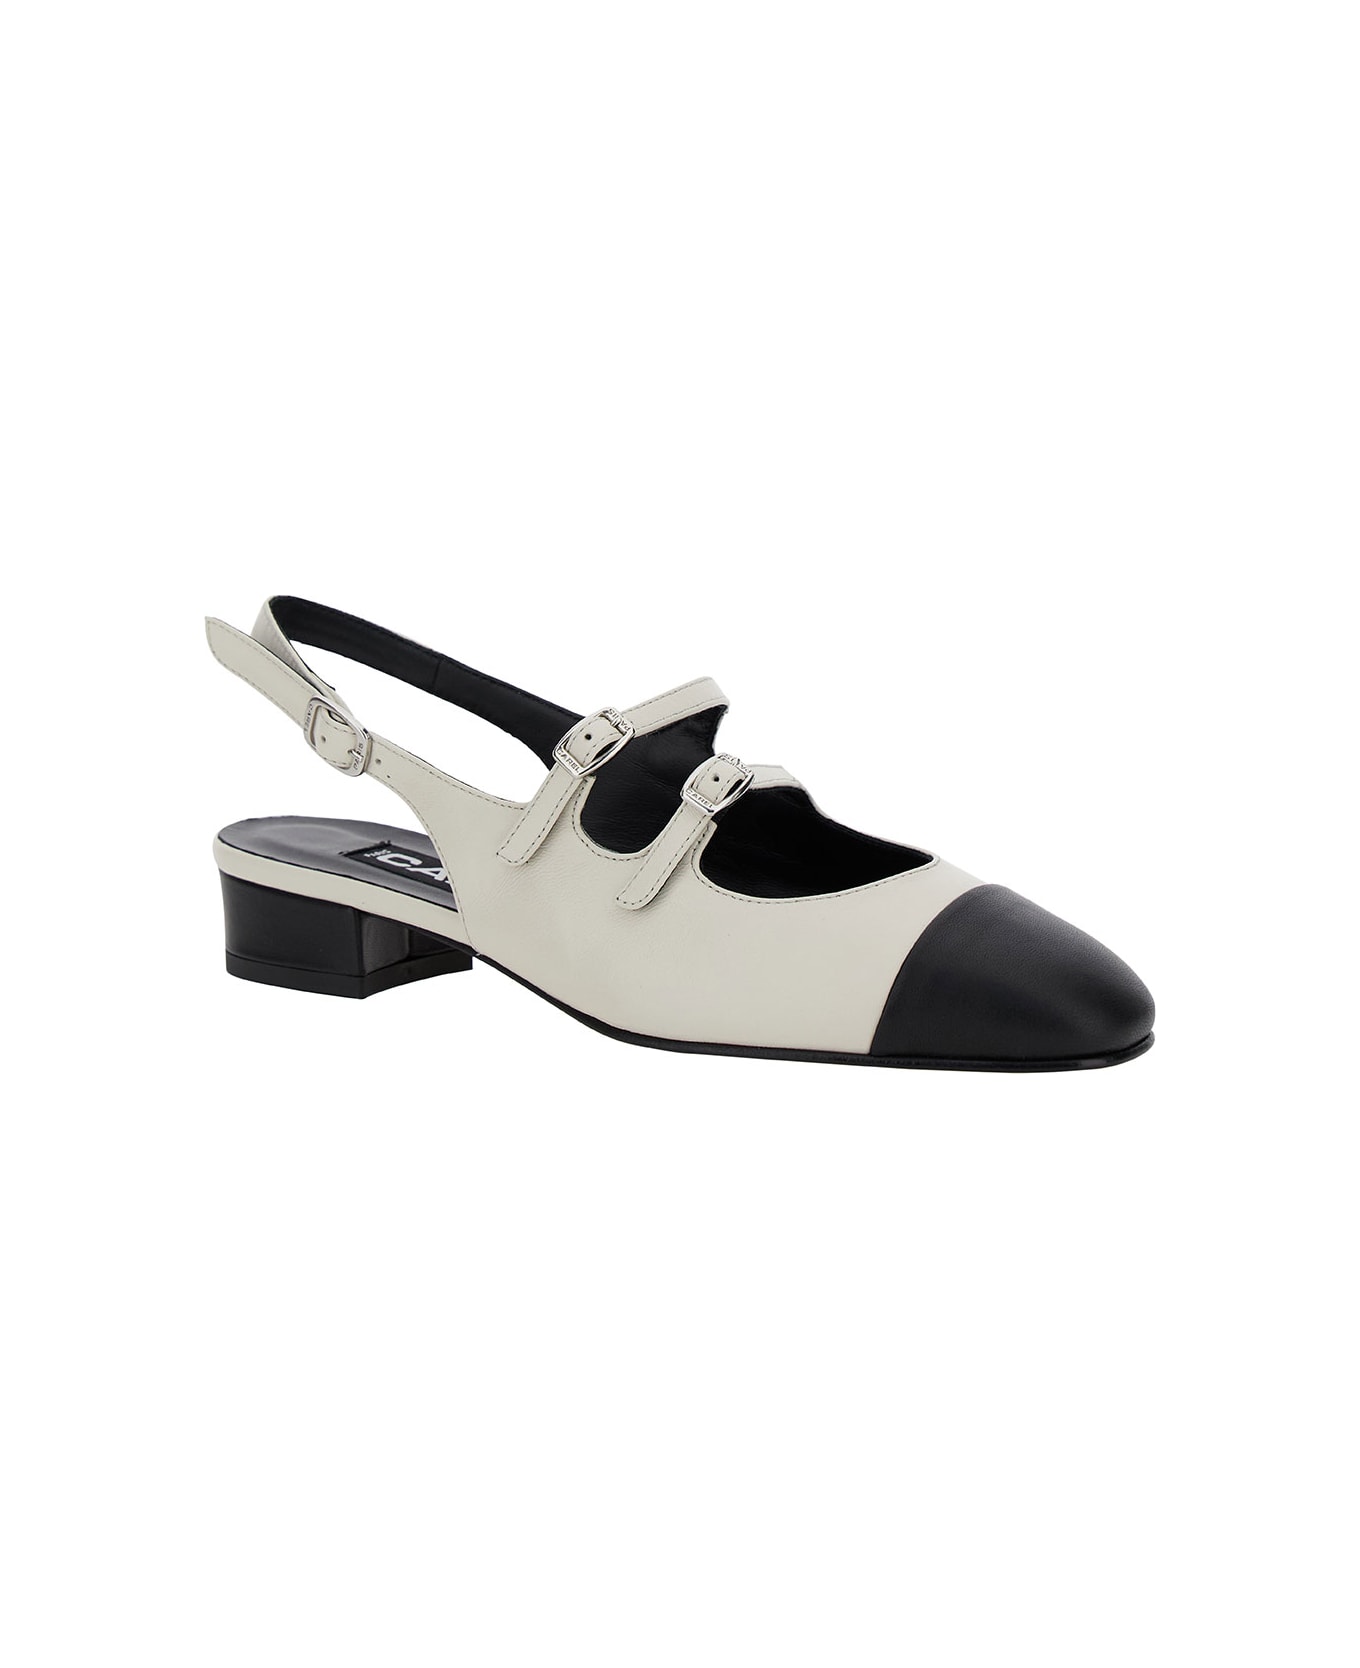 Carel 'abricot' White Slingback Mary Janes With Contrasting Toe In Leather Woman - Beige ハイヒール